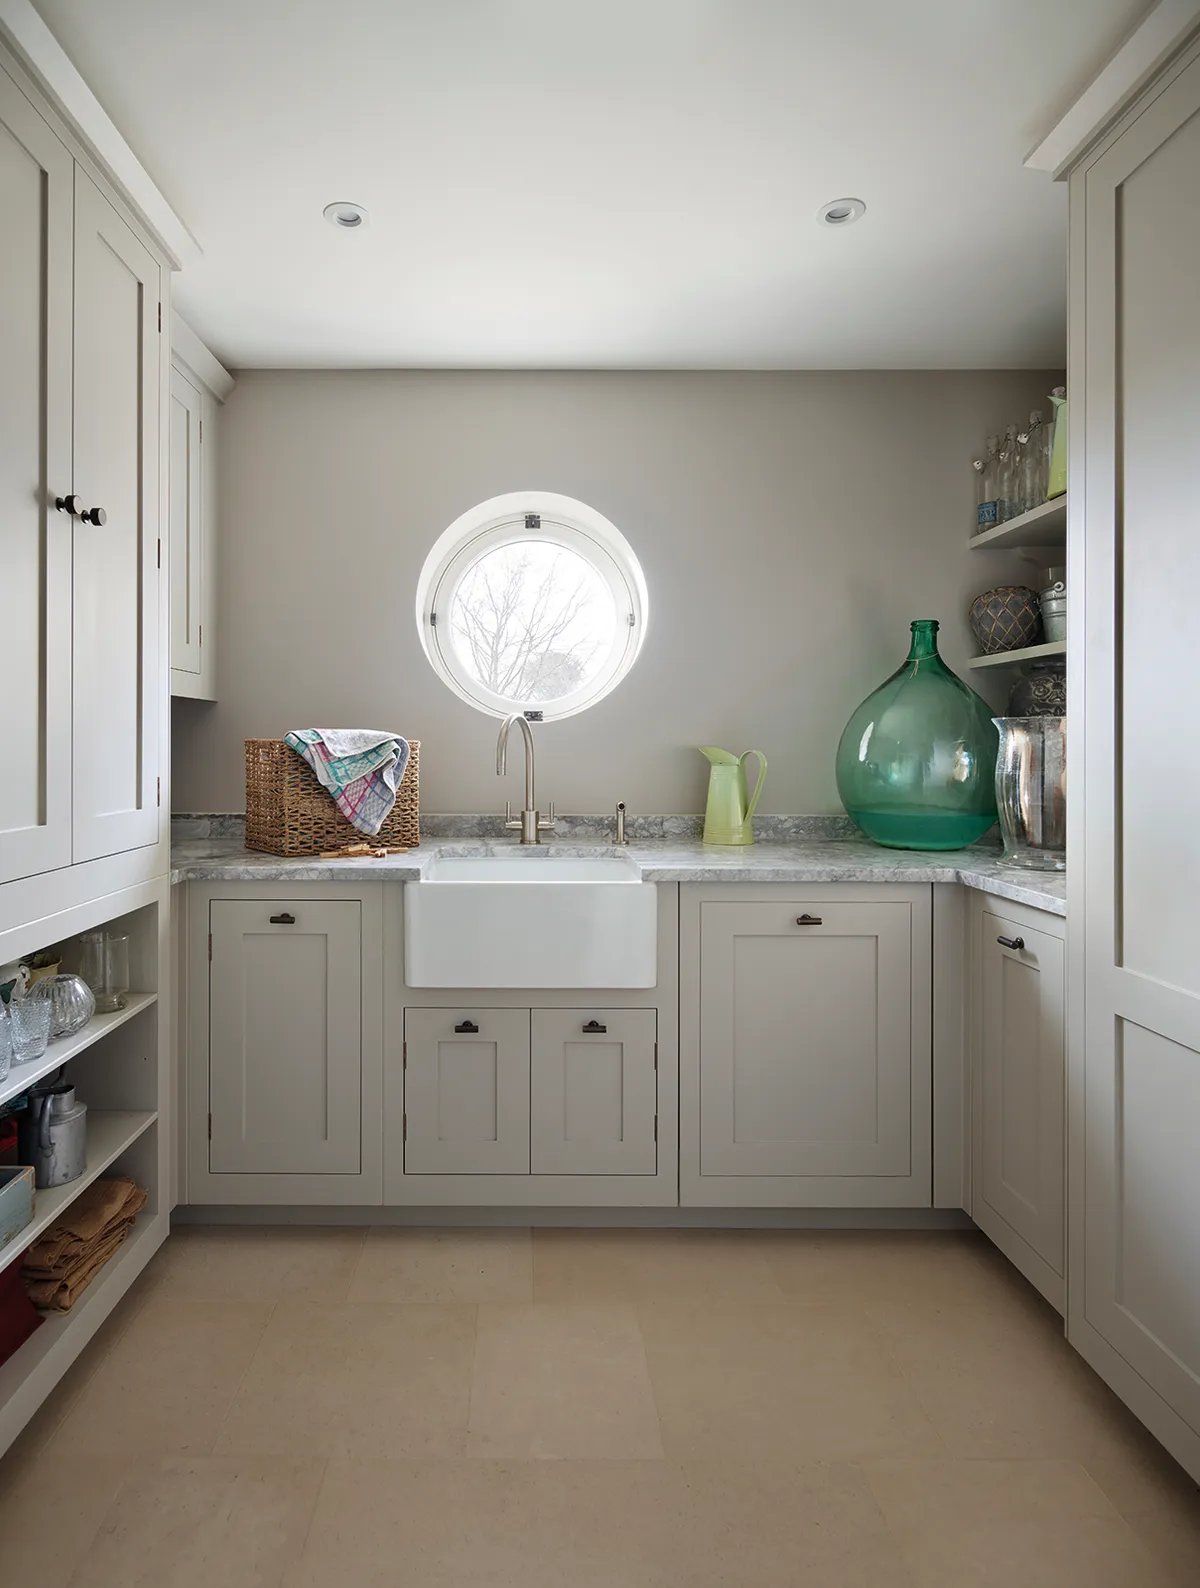 A large and deep Belfast sink comes into its own in a Shaker-style utility room, whether for soaking laundry or washing down the dog, as Harvey Jones’s design demonstrates.